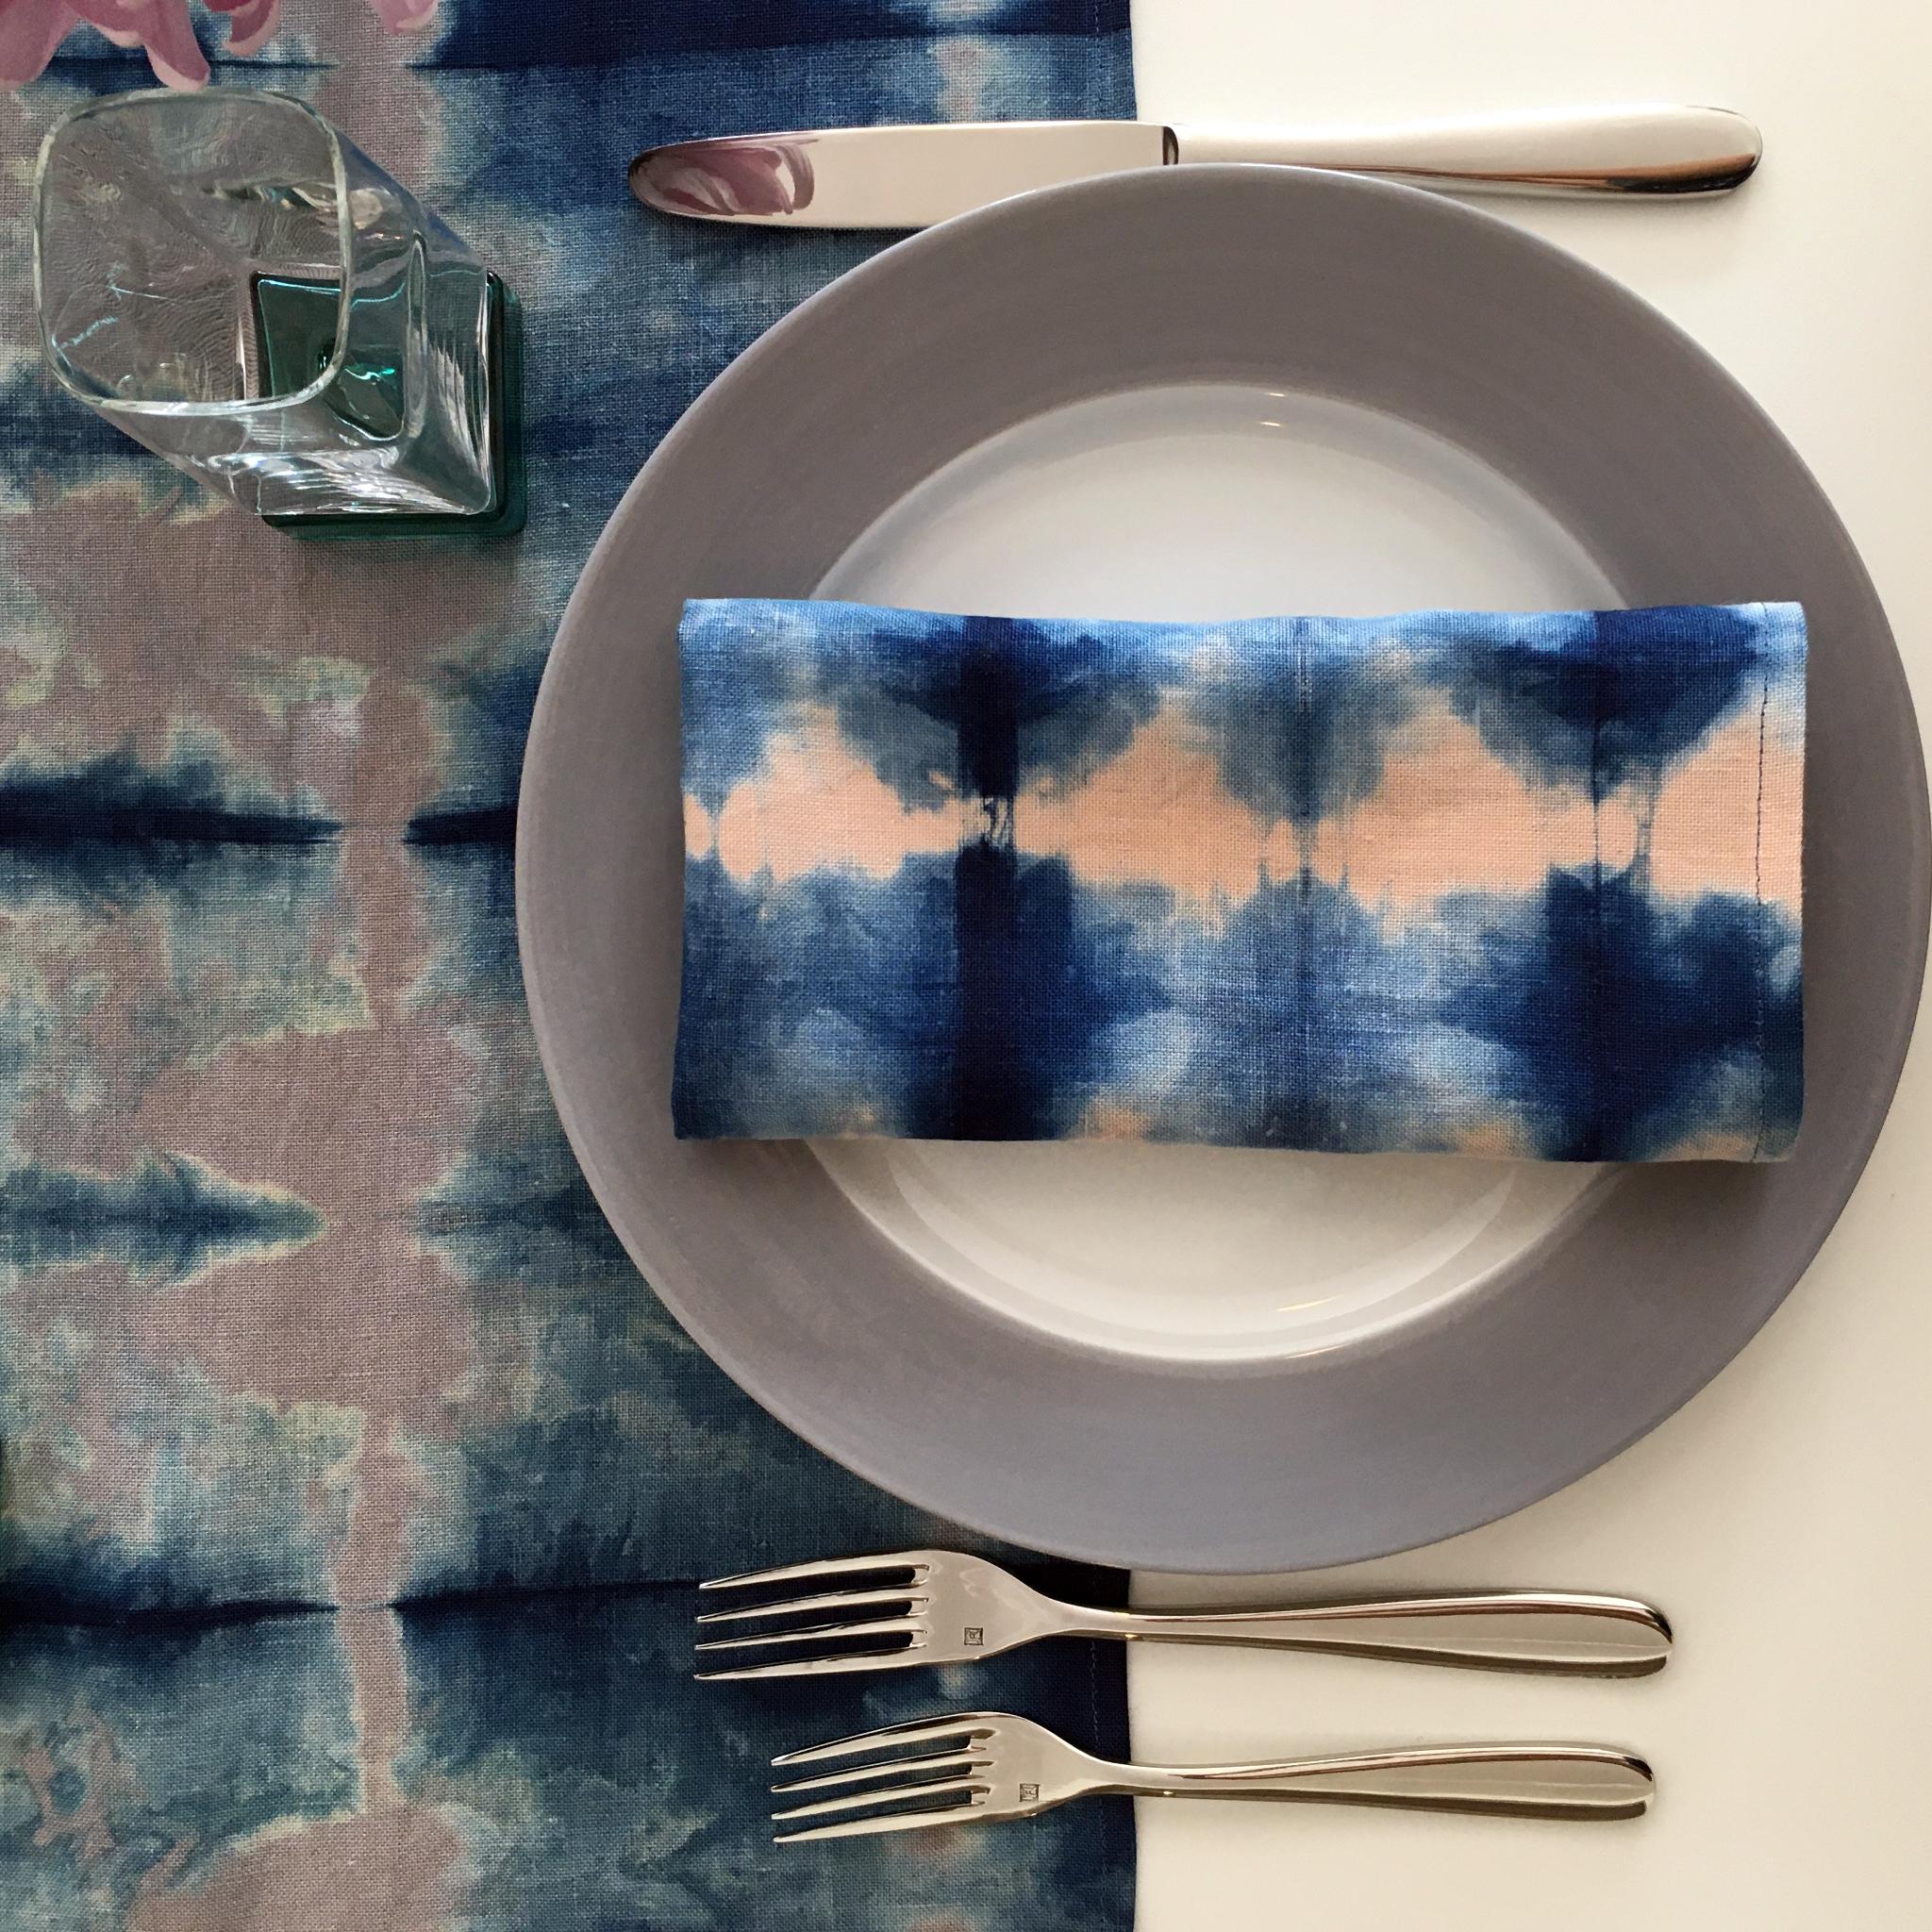 Rose linen napkins, set of four, dyed with indigo in Pleat pattern.

Hand-dyed and sewn in New York City.

Napkins measure approximately 18 x 18 inches.

Each linen napkin is hand dyed and one of a kind, slight variations may occur within the